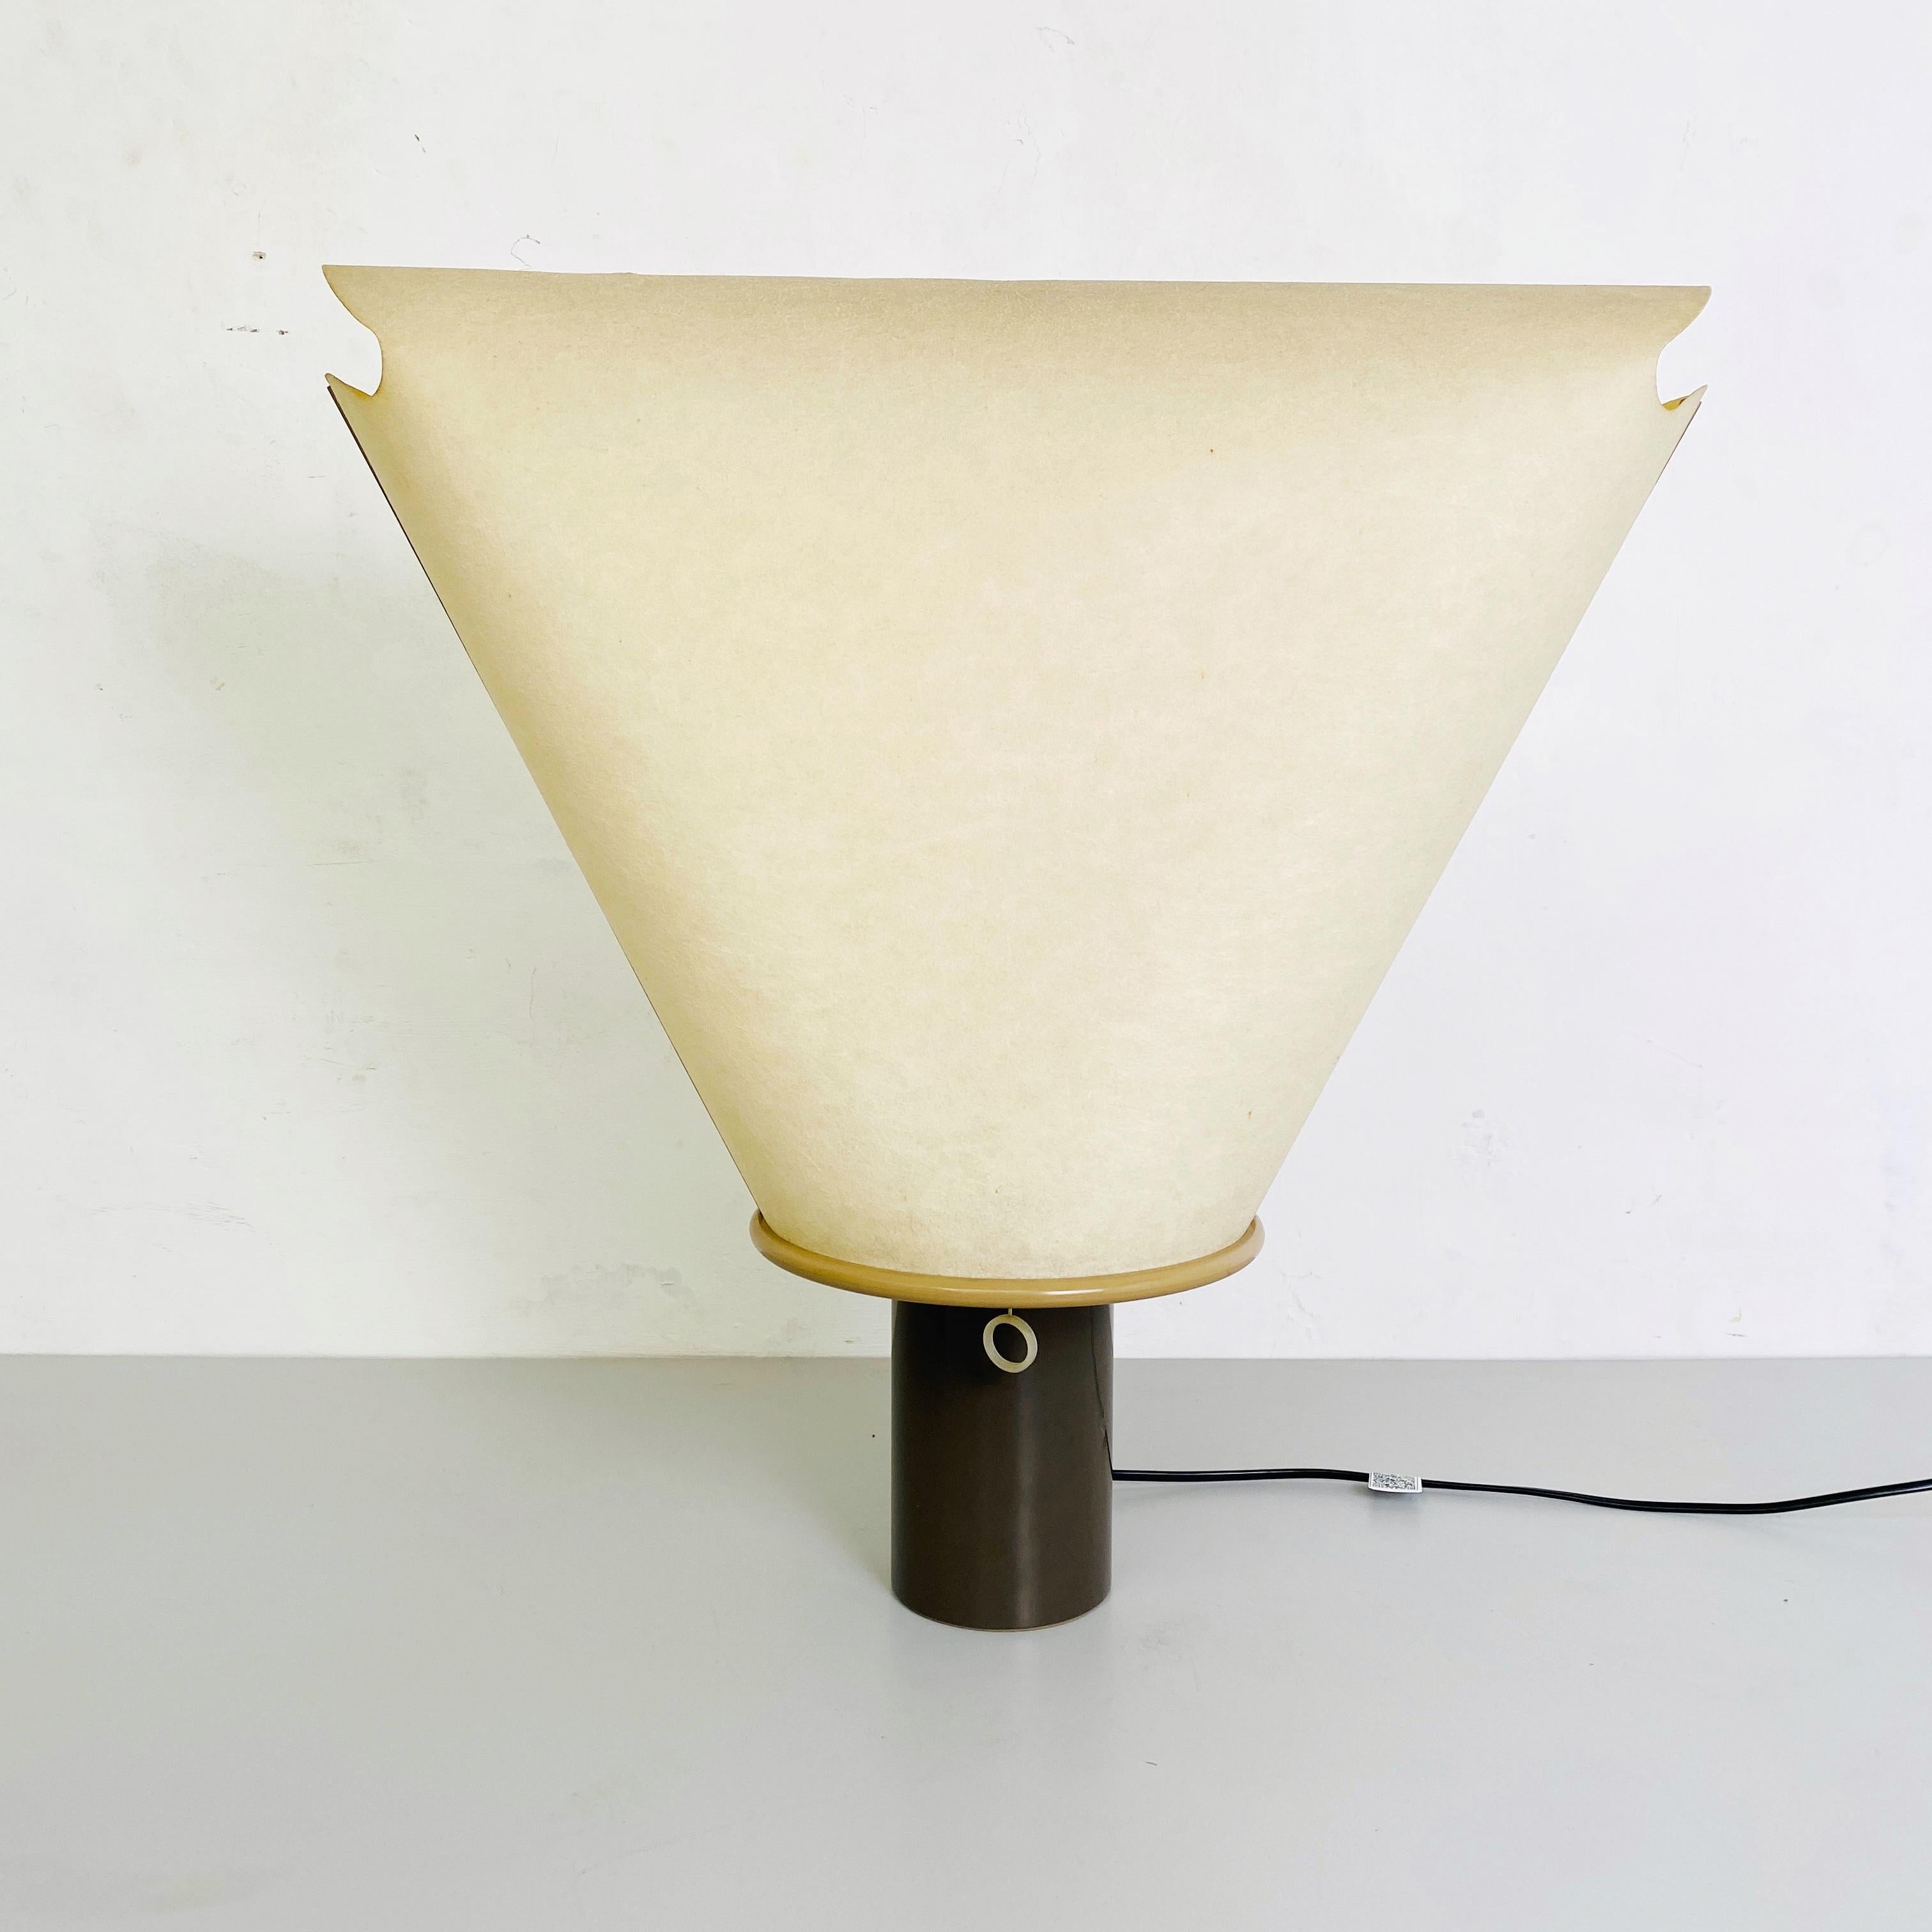 Dolly A 200 table Lamp by King & Miranda Design for Arteluce, 1970s.
Dolly A 200 table lamp is composed of a brown plastic base and irregular lampshade in perforated parchment with chain switch. Produced by Arteluce and project by King & Miranda